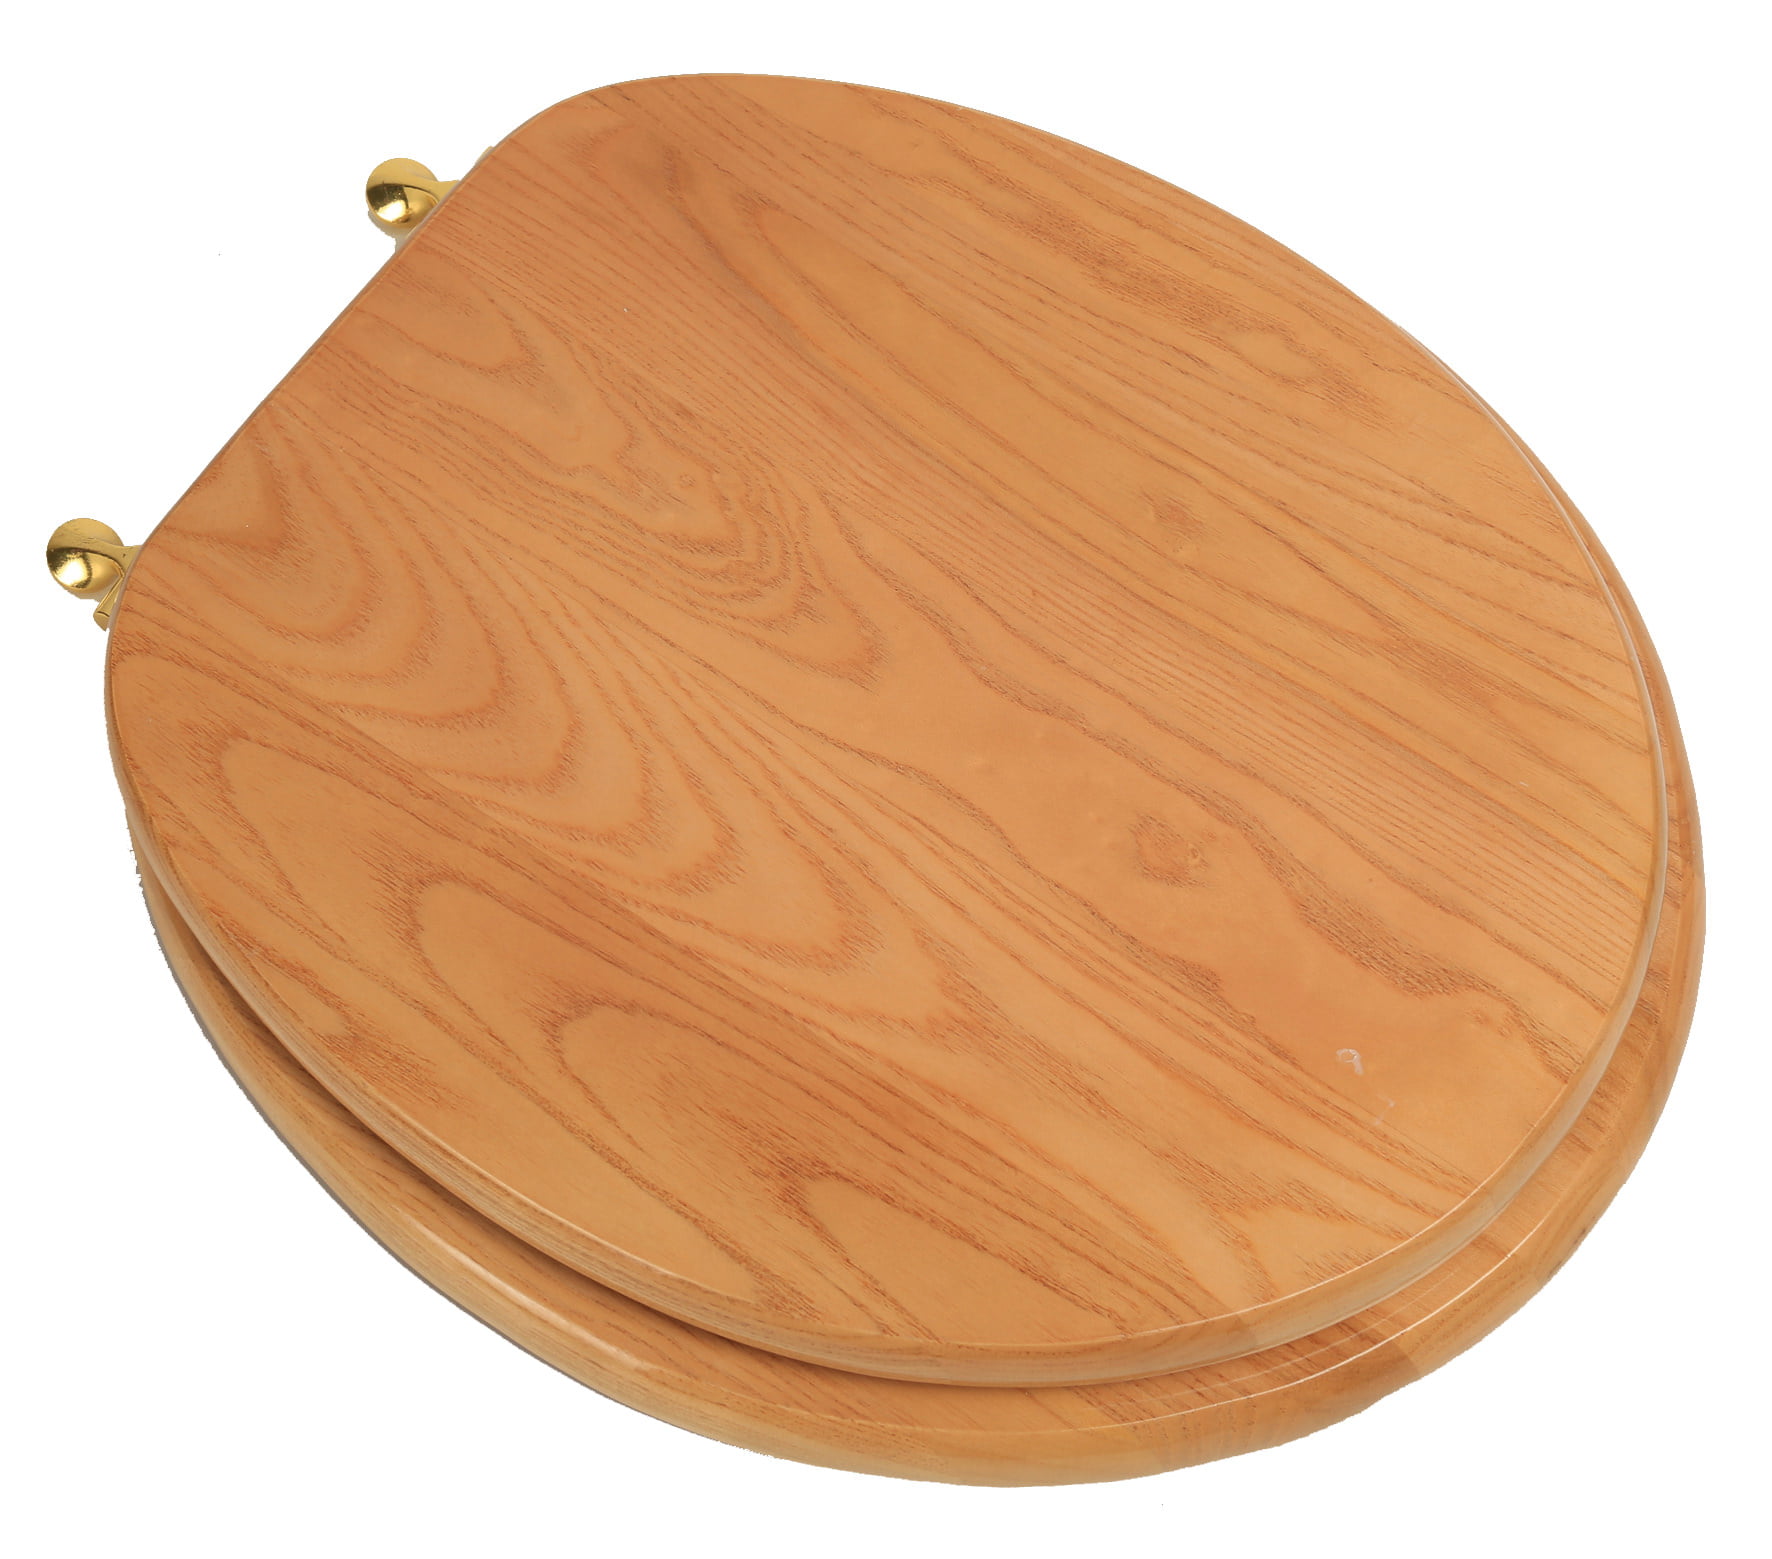 Bamboo Begie Heavy duty Metal Hinges Round Wooden Toilet seats with Bamboo Design.